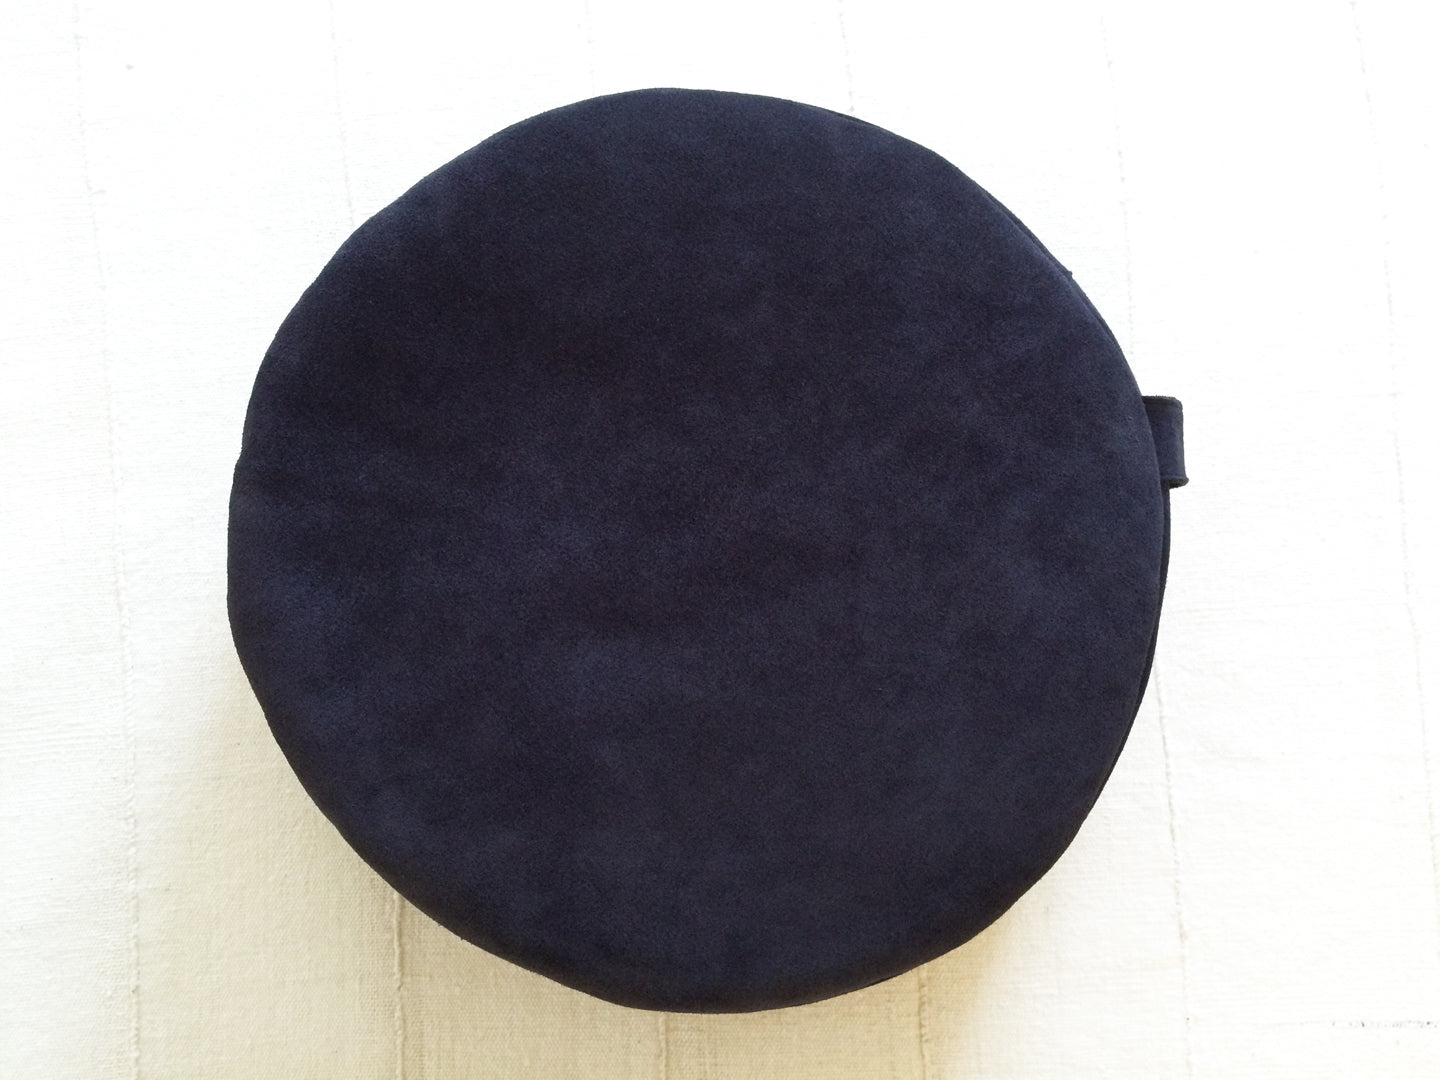 PEBBLE meditation cushion in navy suede